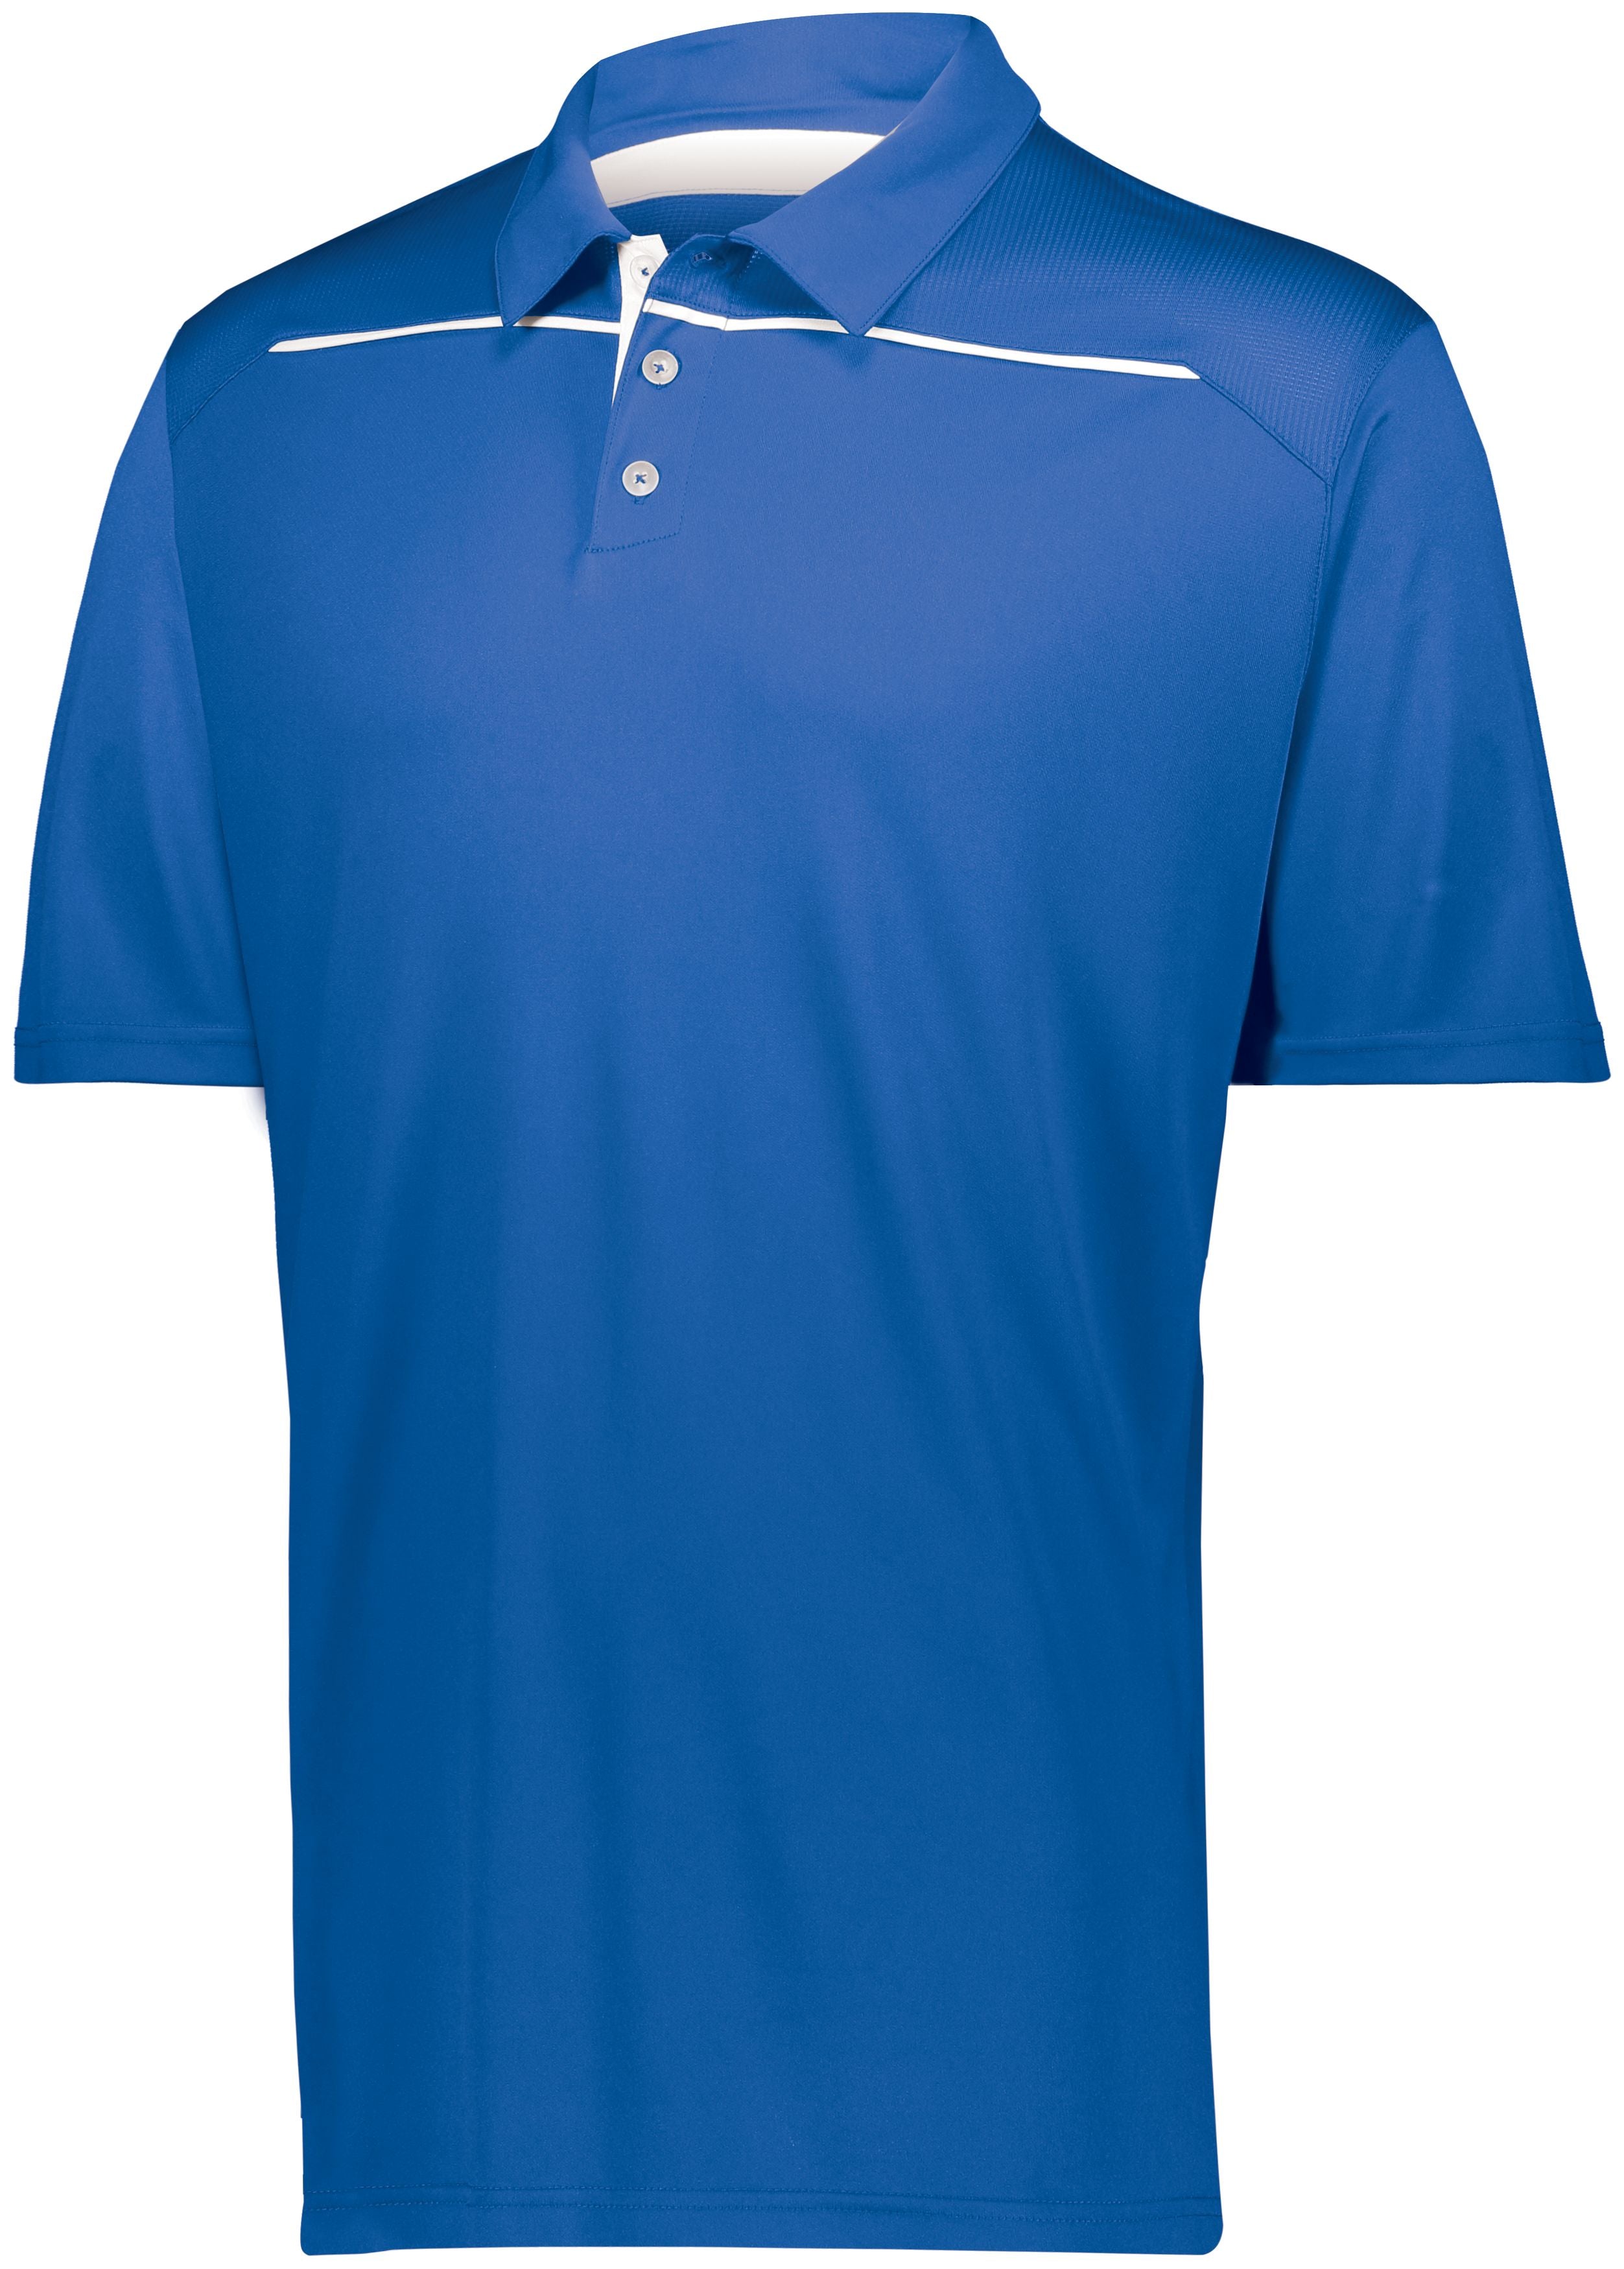 Holloway Defer Polo in Royal/White  -Part of the Adult, Adult-Polos, Polos, Holloway, Shirts product lines at KanaleyCreations.com